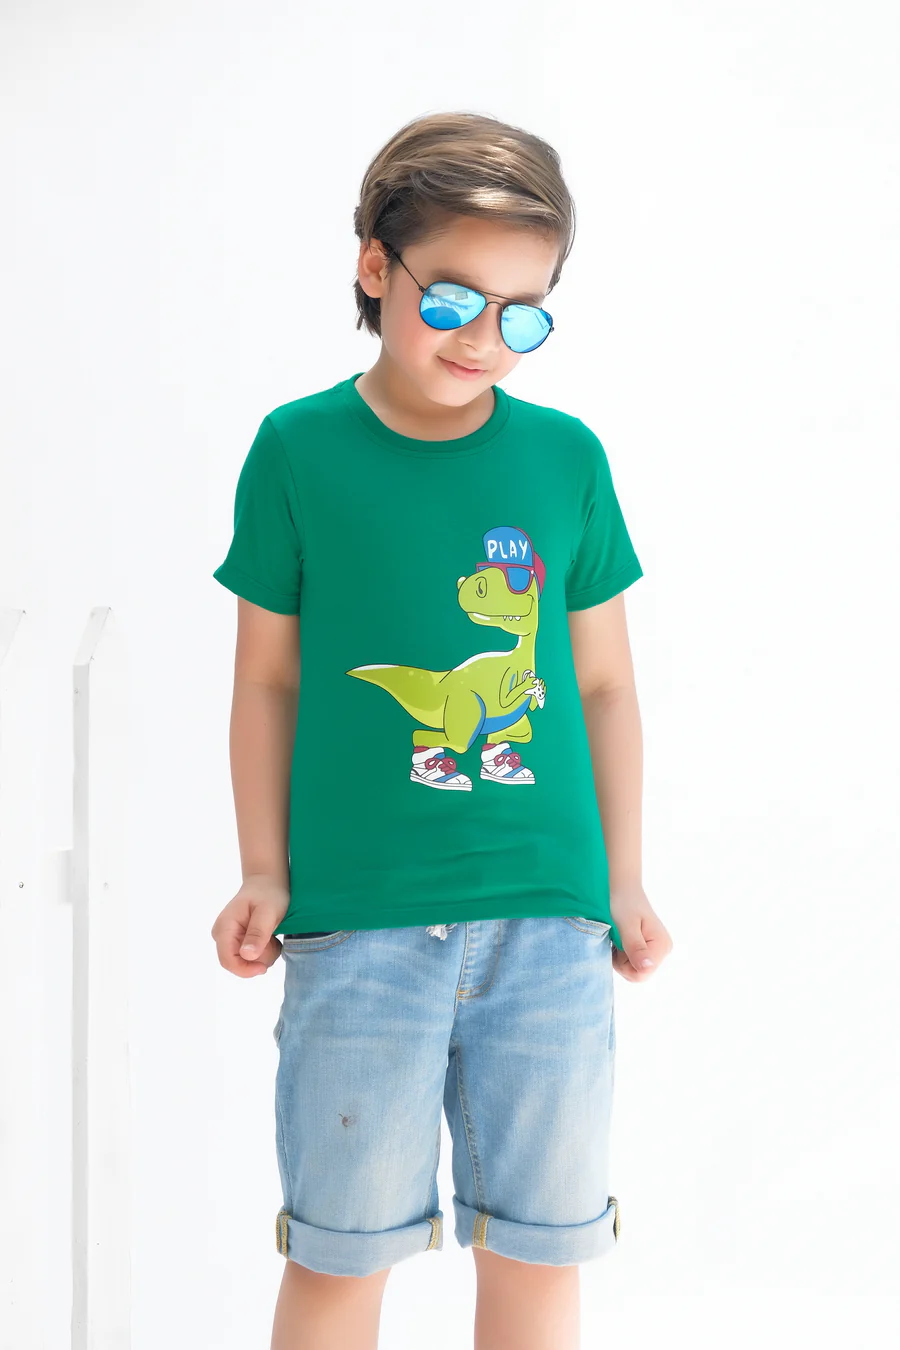 Cool Dino - Half Sleeves T-Shirts For Kids - Green - SBT-339